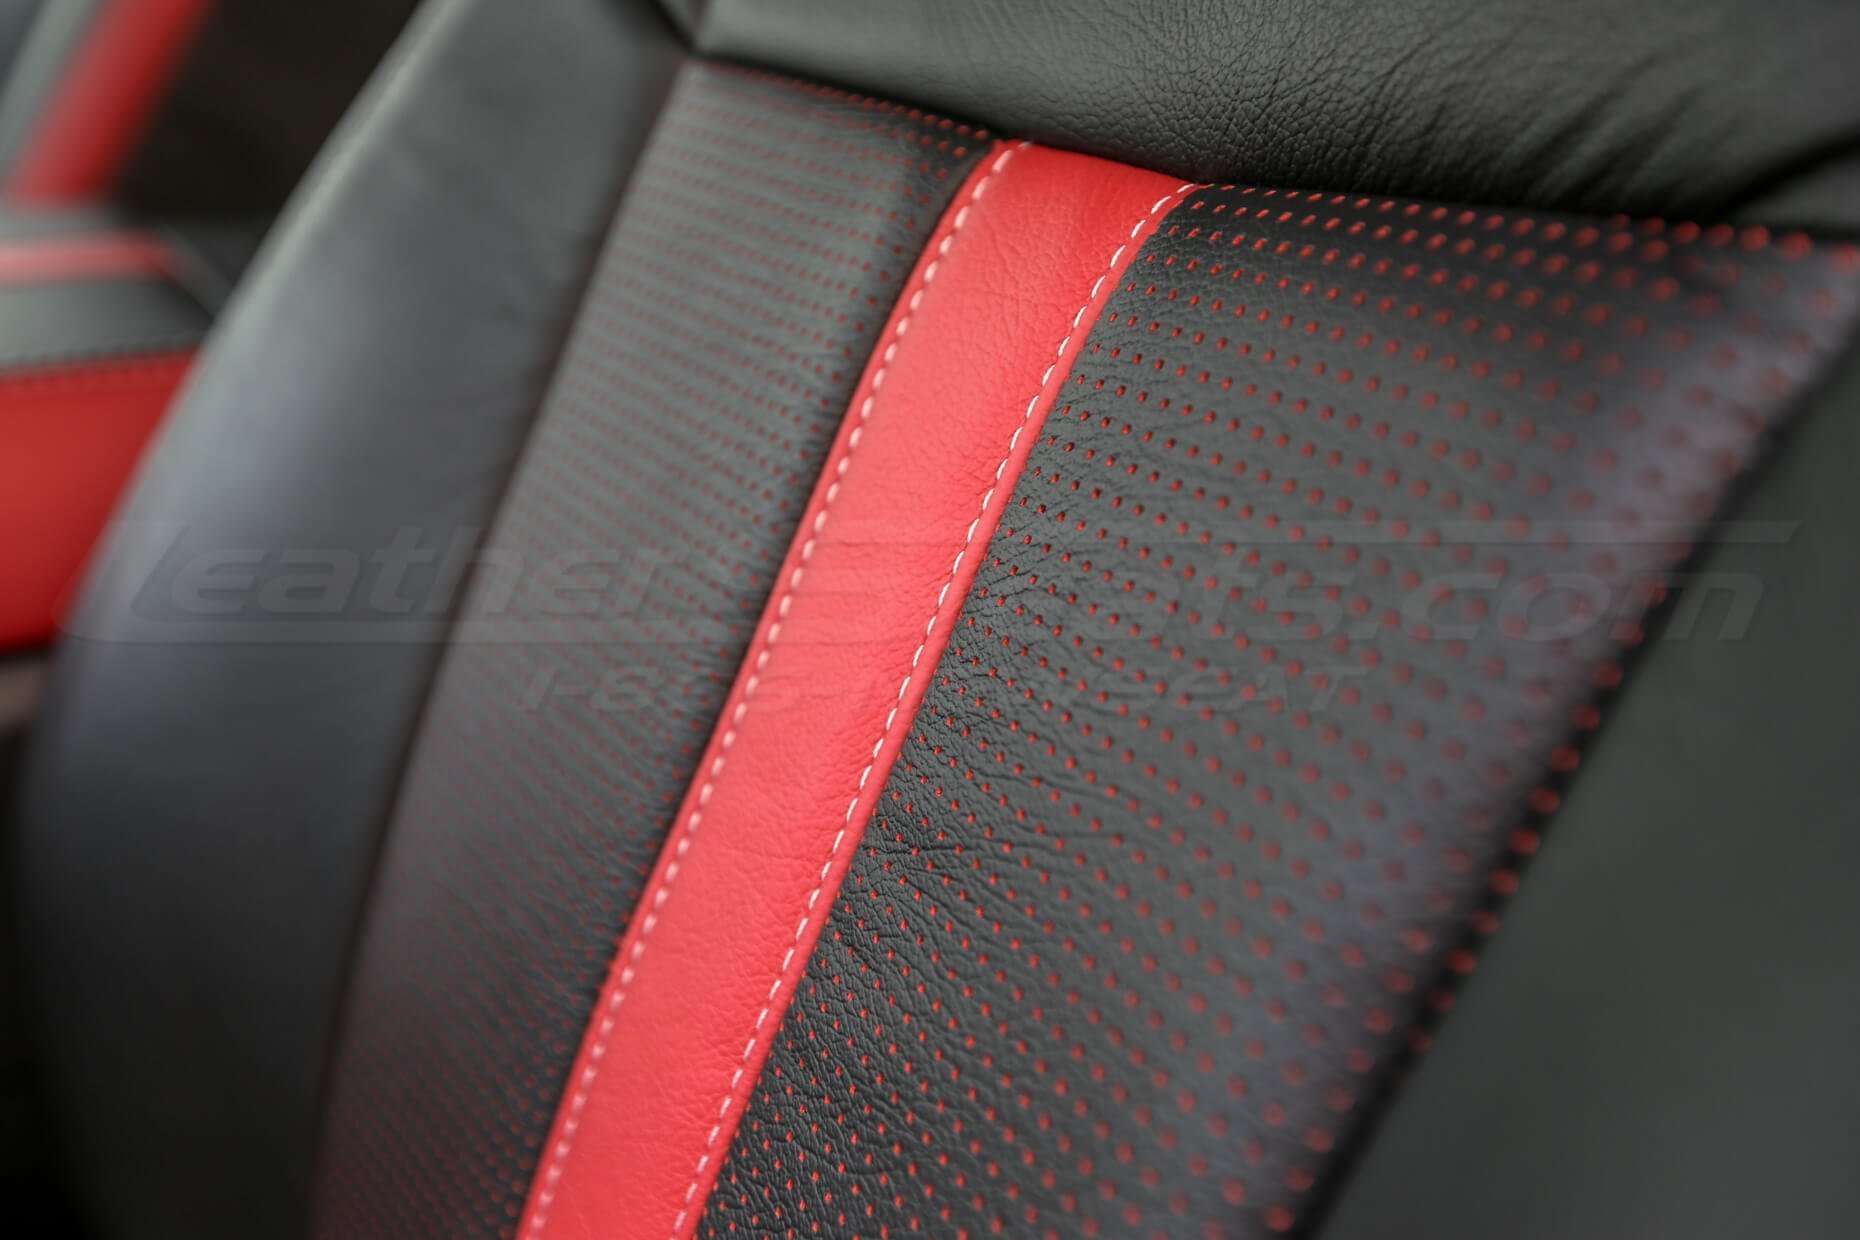 Ford F150 Leather Seats - Black & Piazza Red - Piazza Perforation close-up